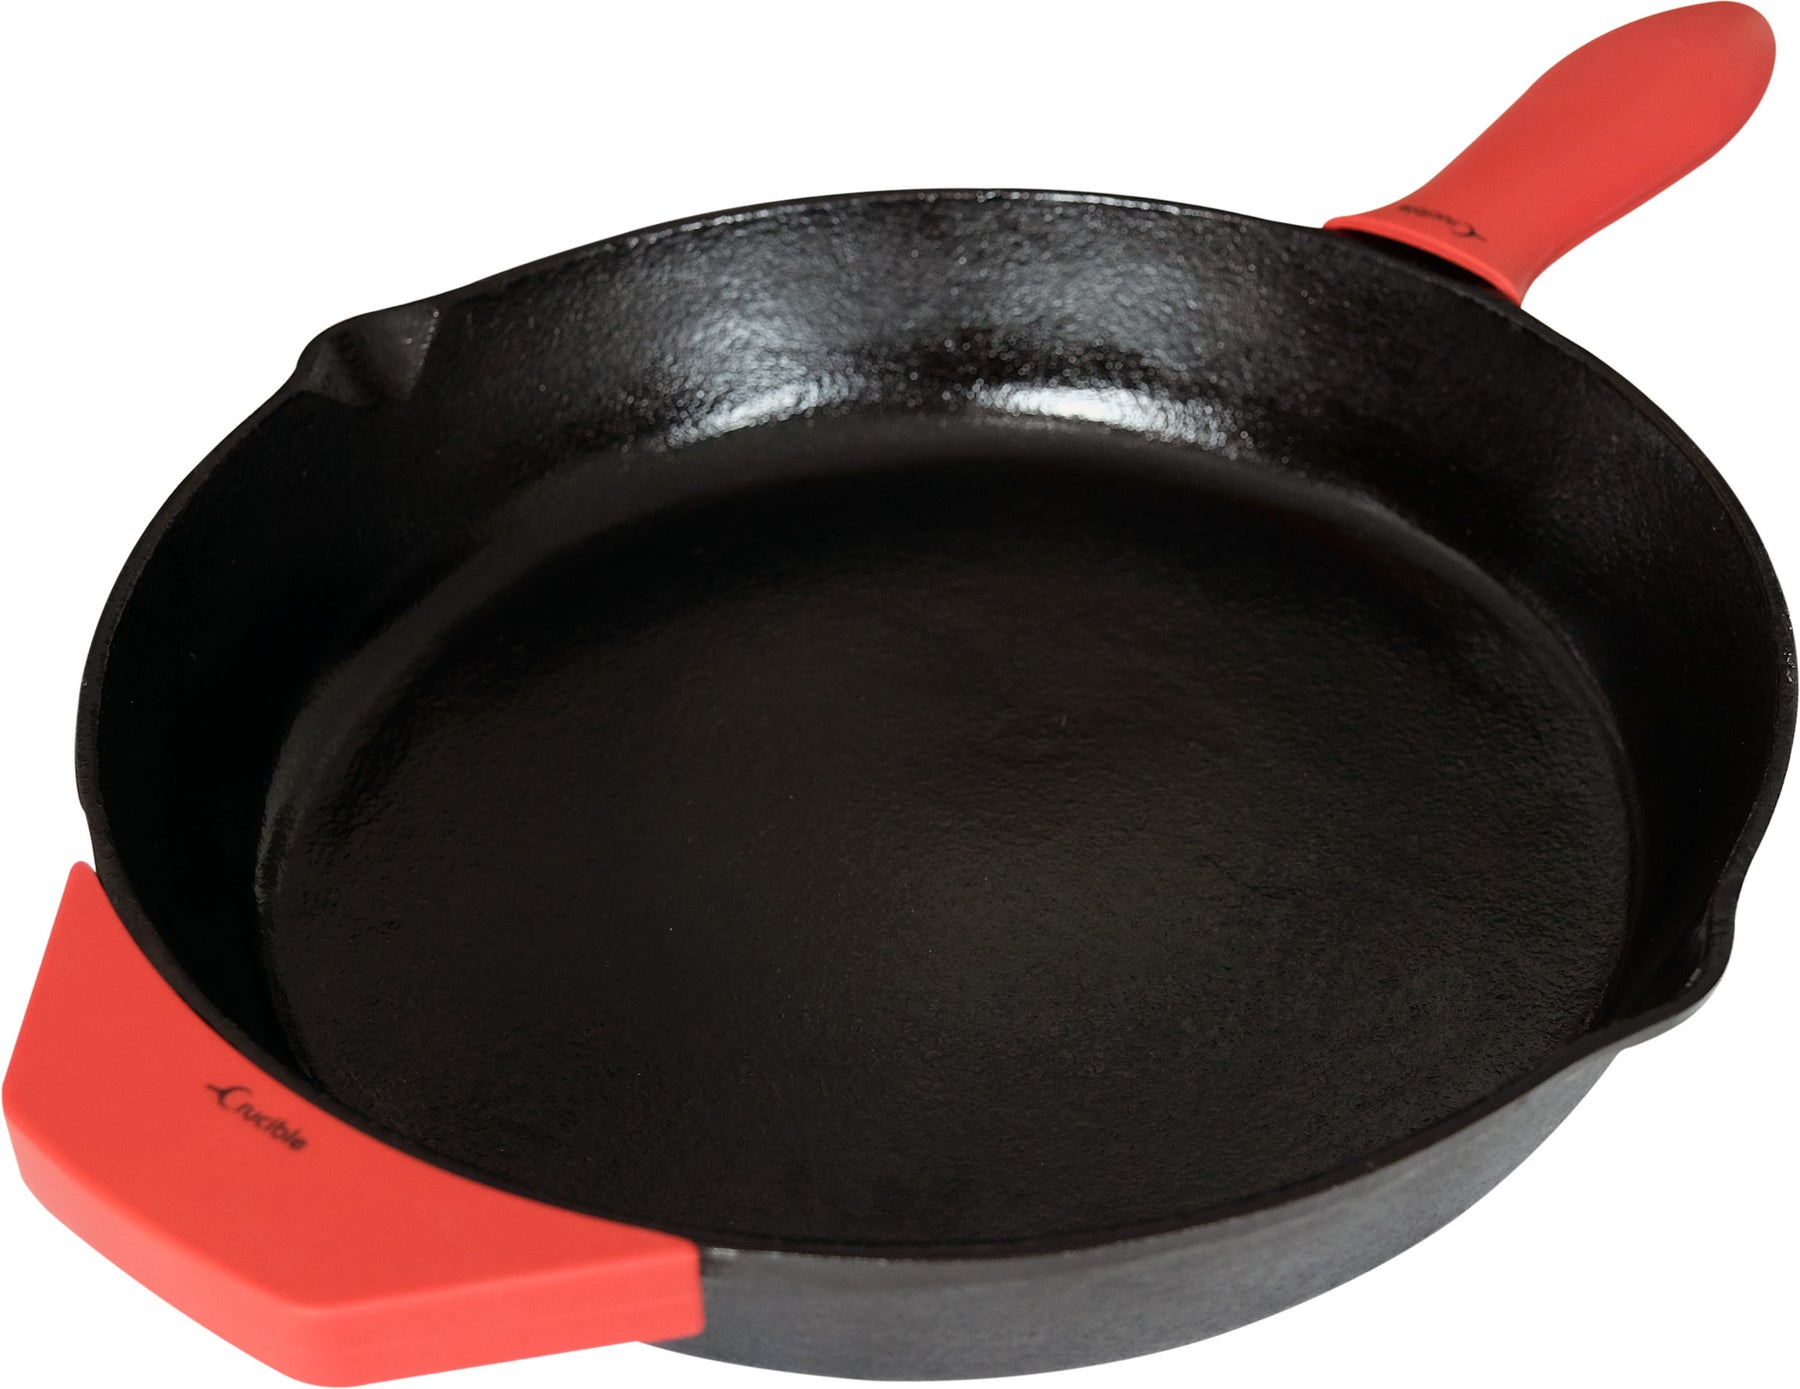 15-Inch (38 cm) Cast Iron Skillet Set, Silicone Handle Holders, Glass –  Crucible Cookware